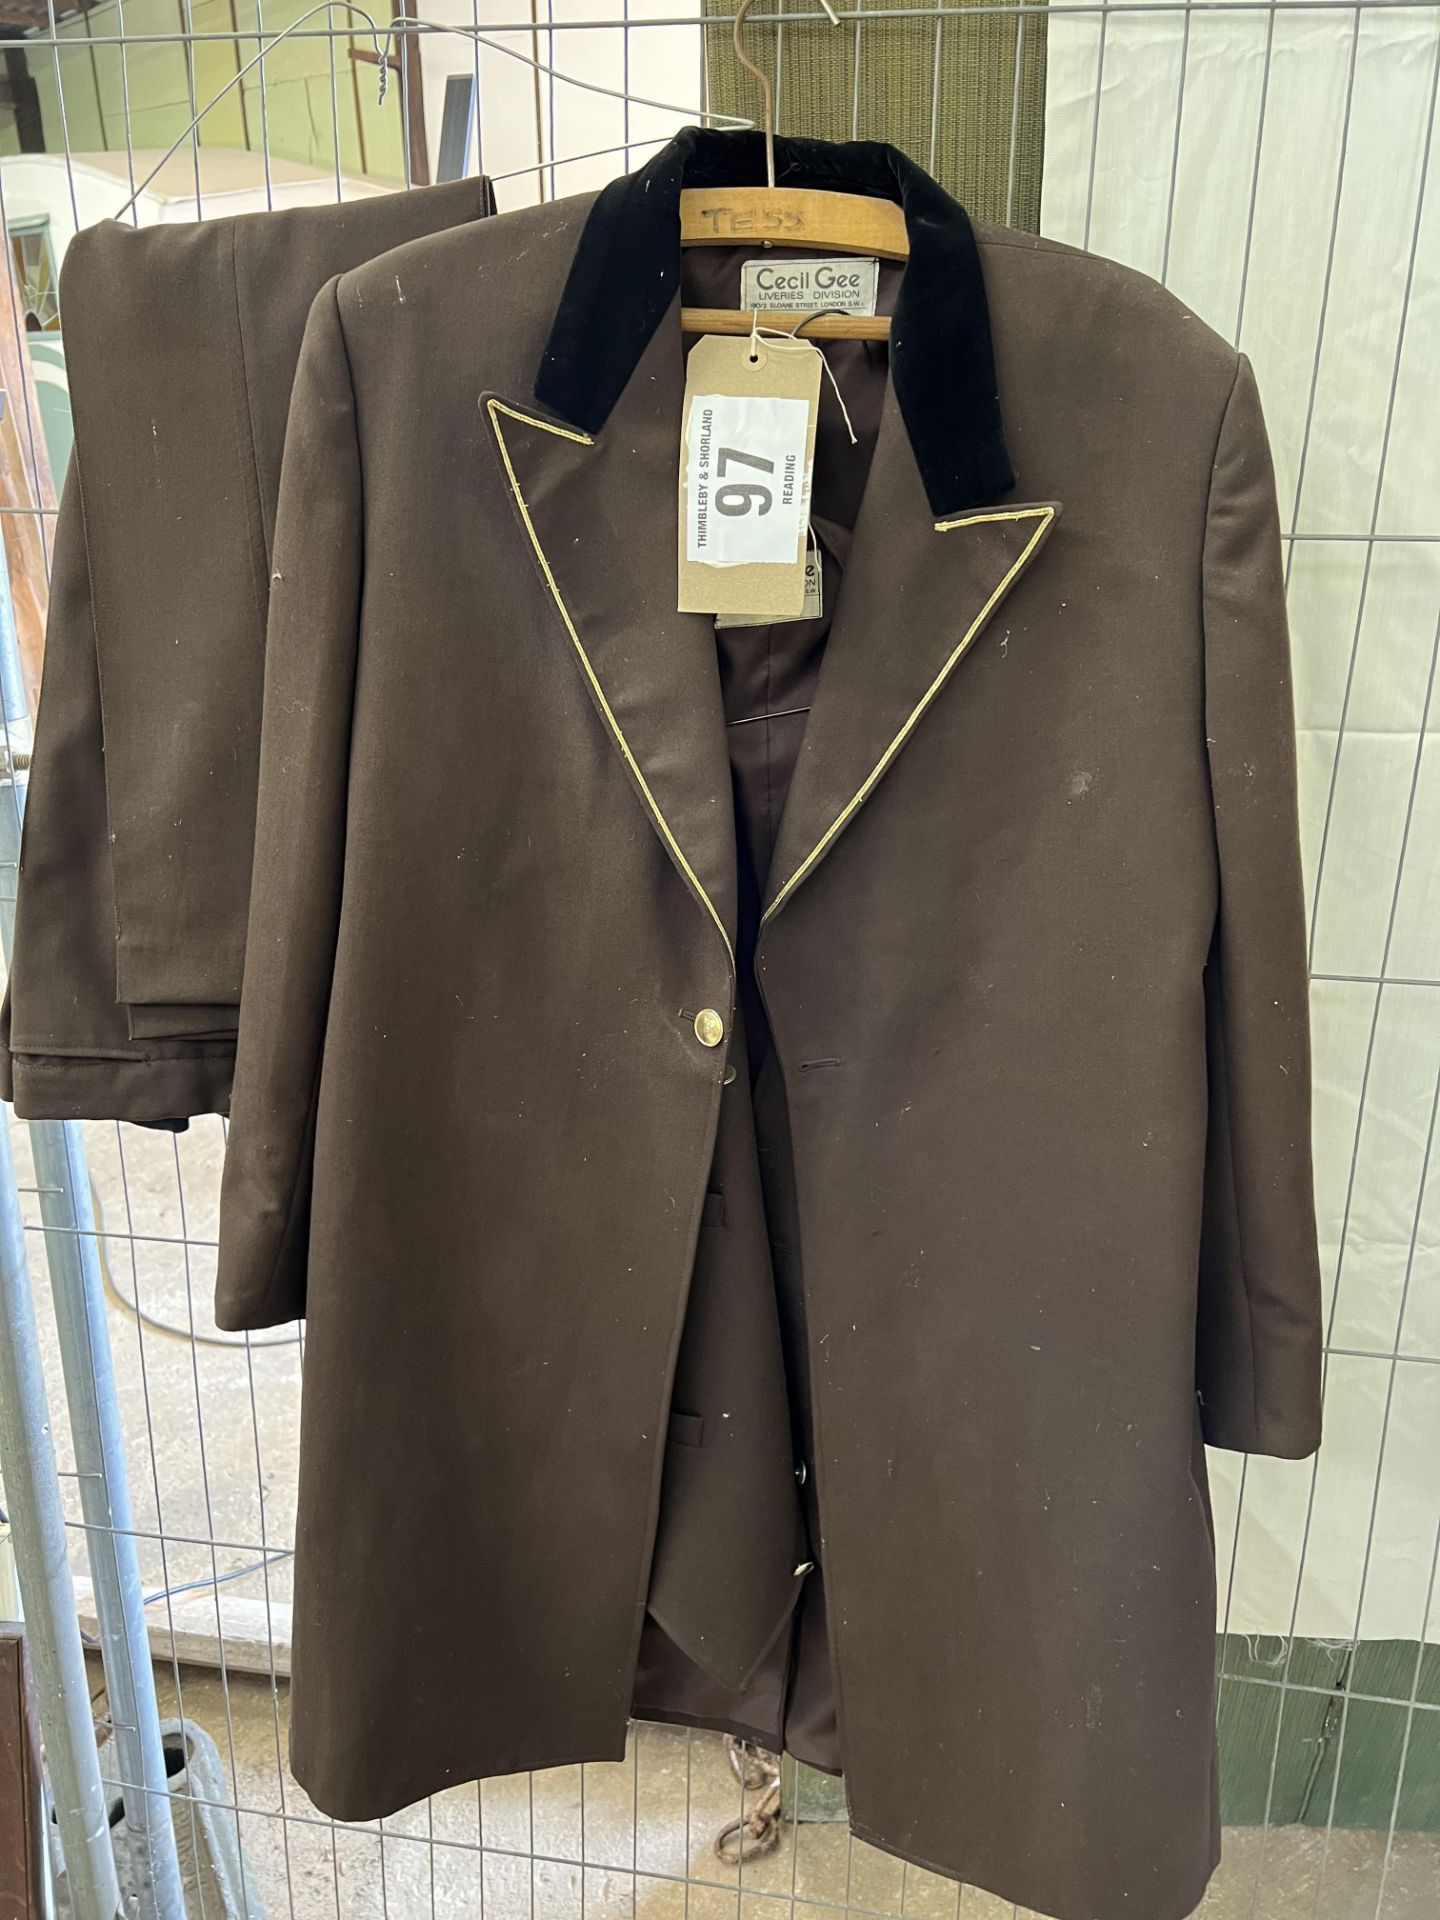 A brown livery suit by Cecil Gee